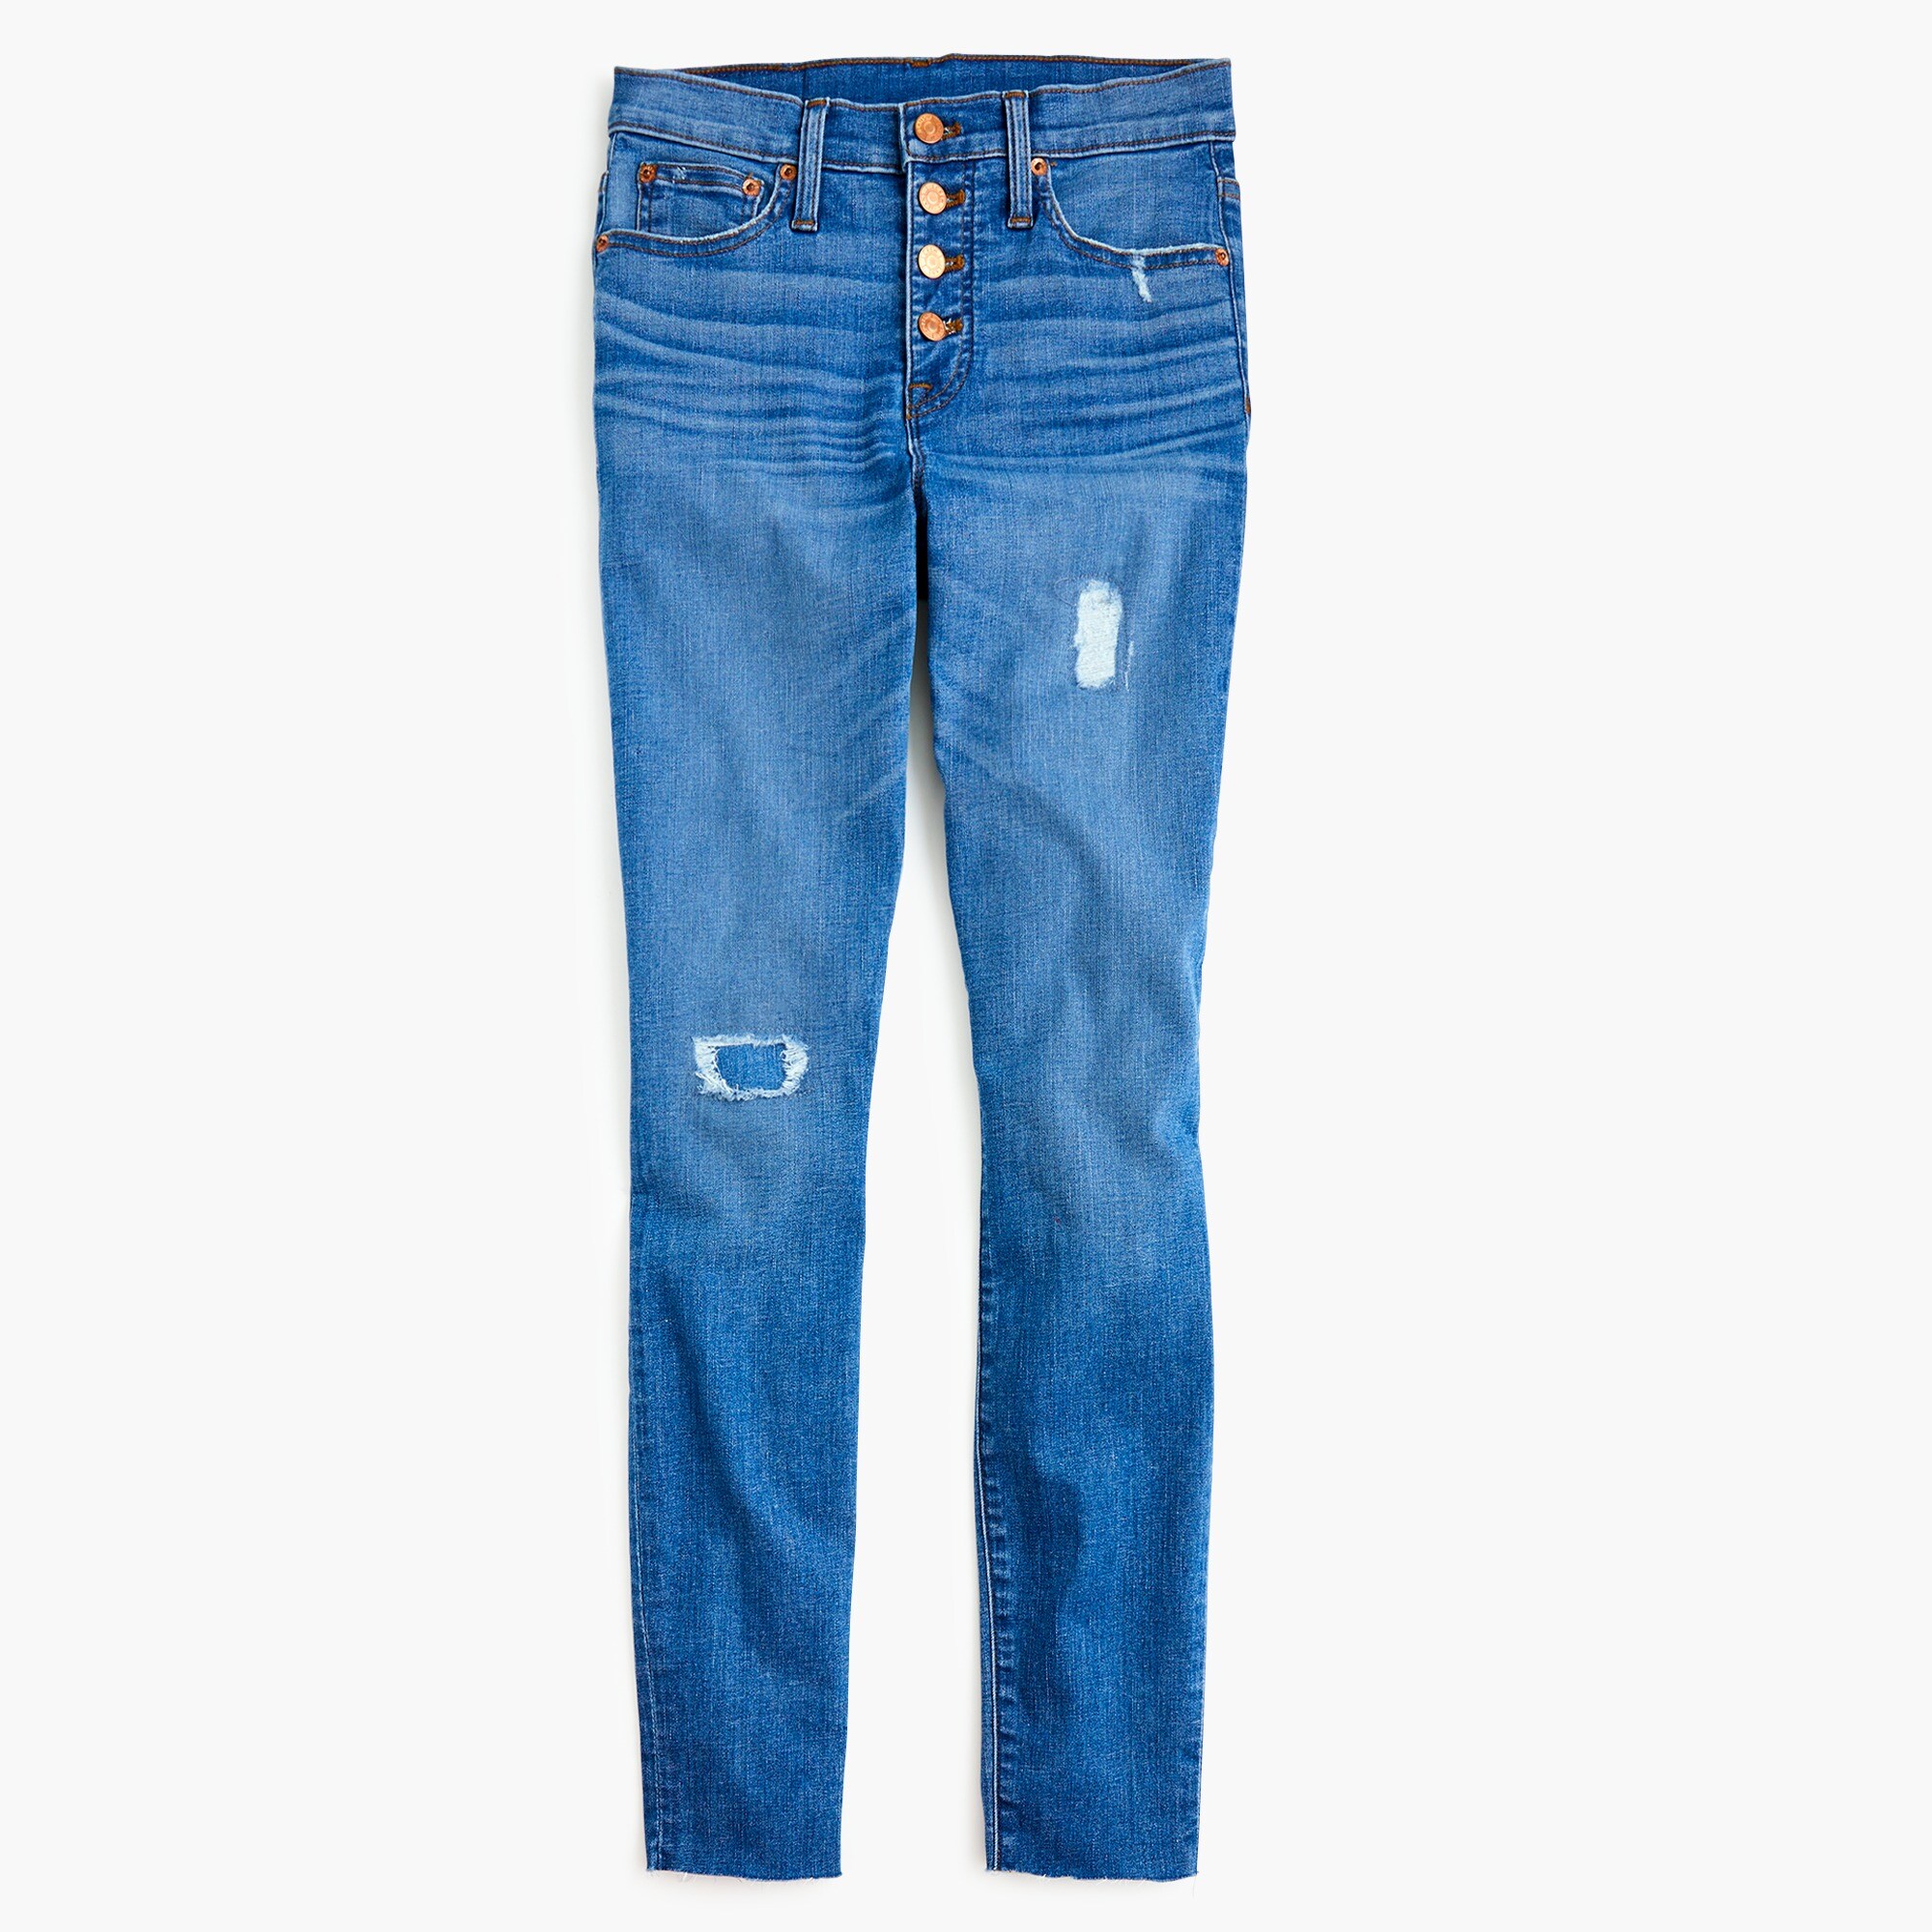 J.Crew: Tall 9 High-rise Toothpick Jean With Button Fly And Cut Hems